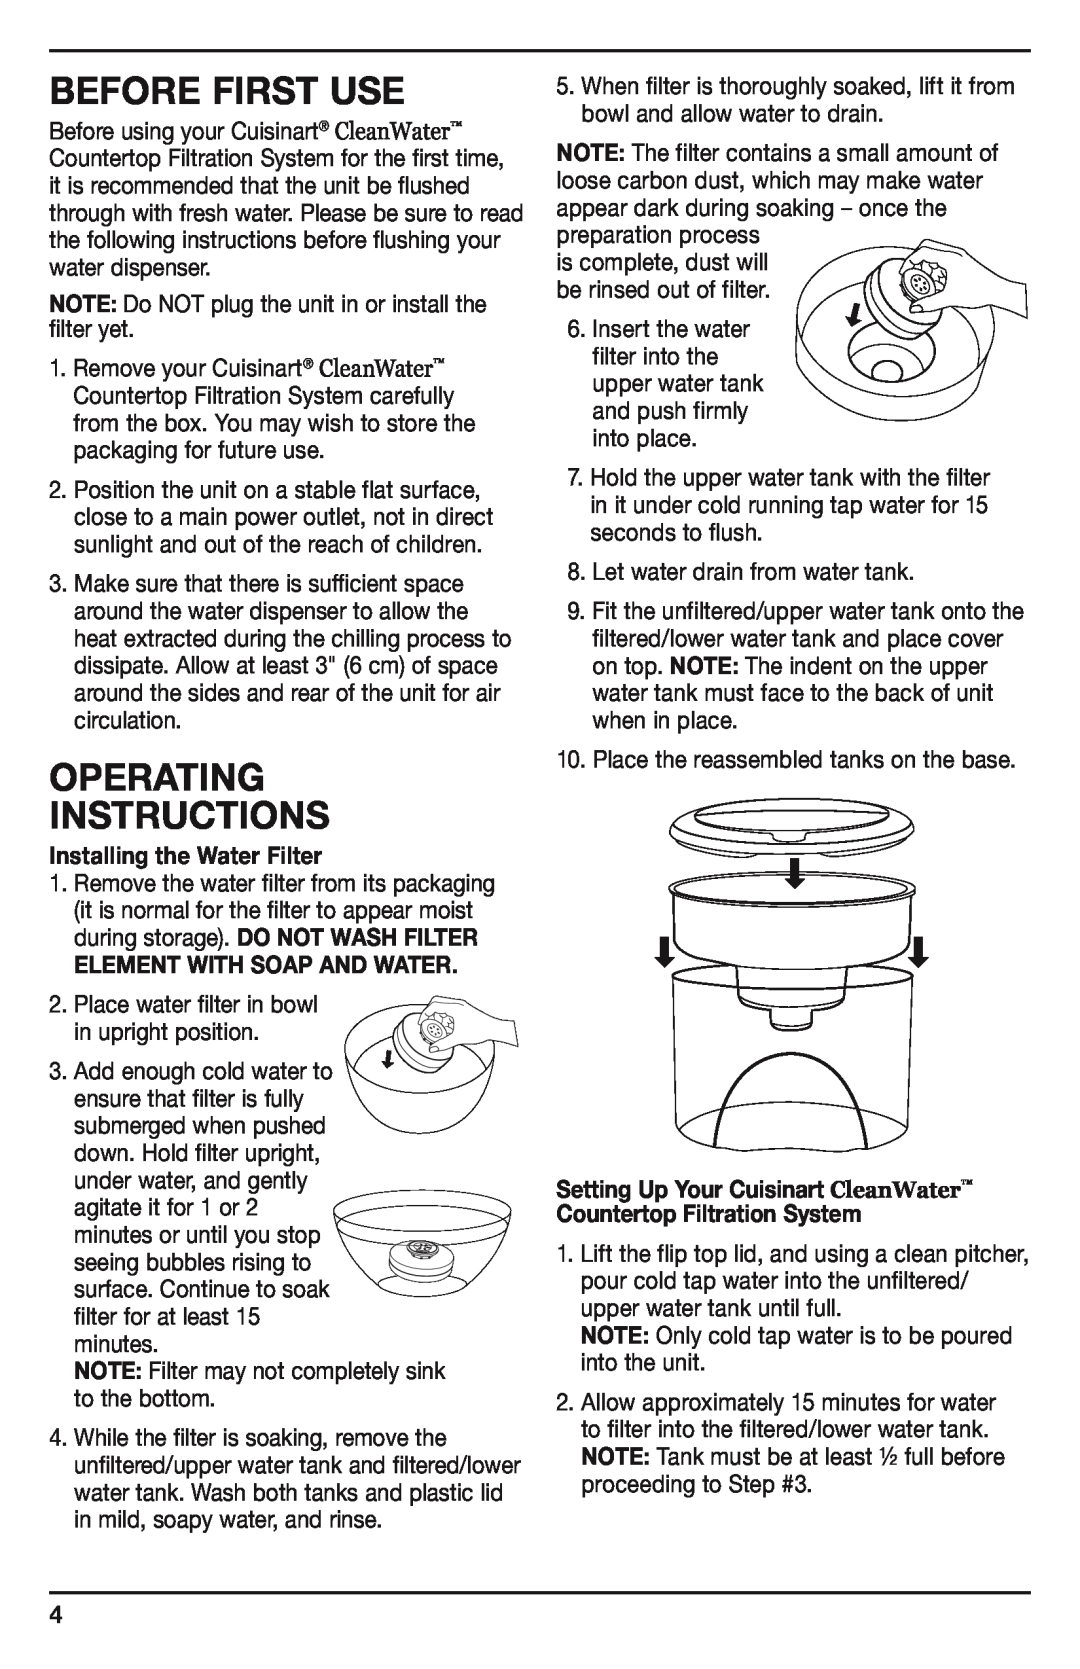 Cuisinart WCH-950C Before First Use, Operating Instructions, Installing the Water Filter, Element With Soap And Water 